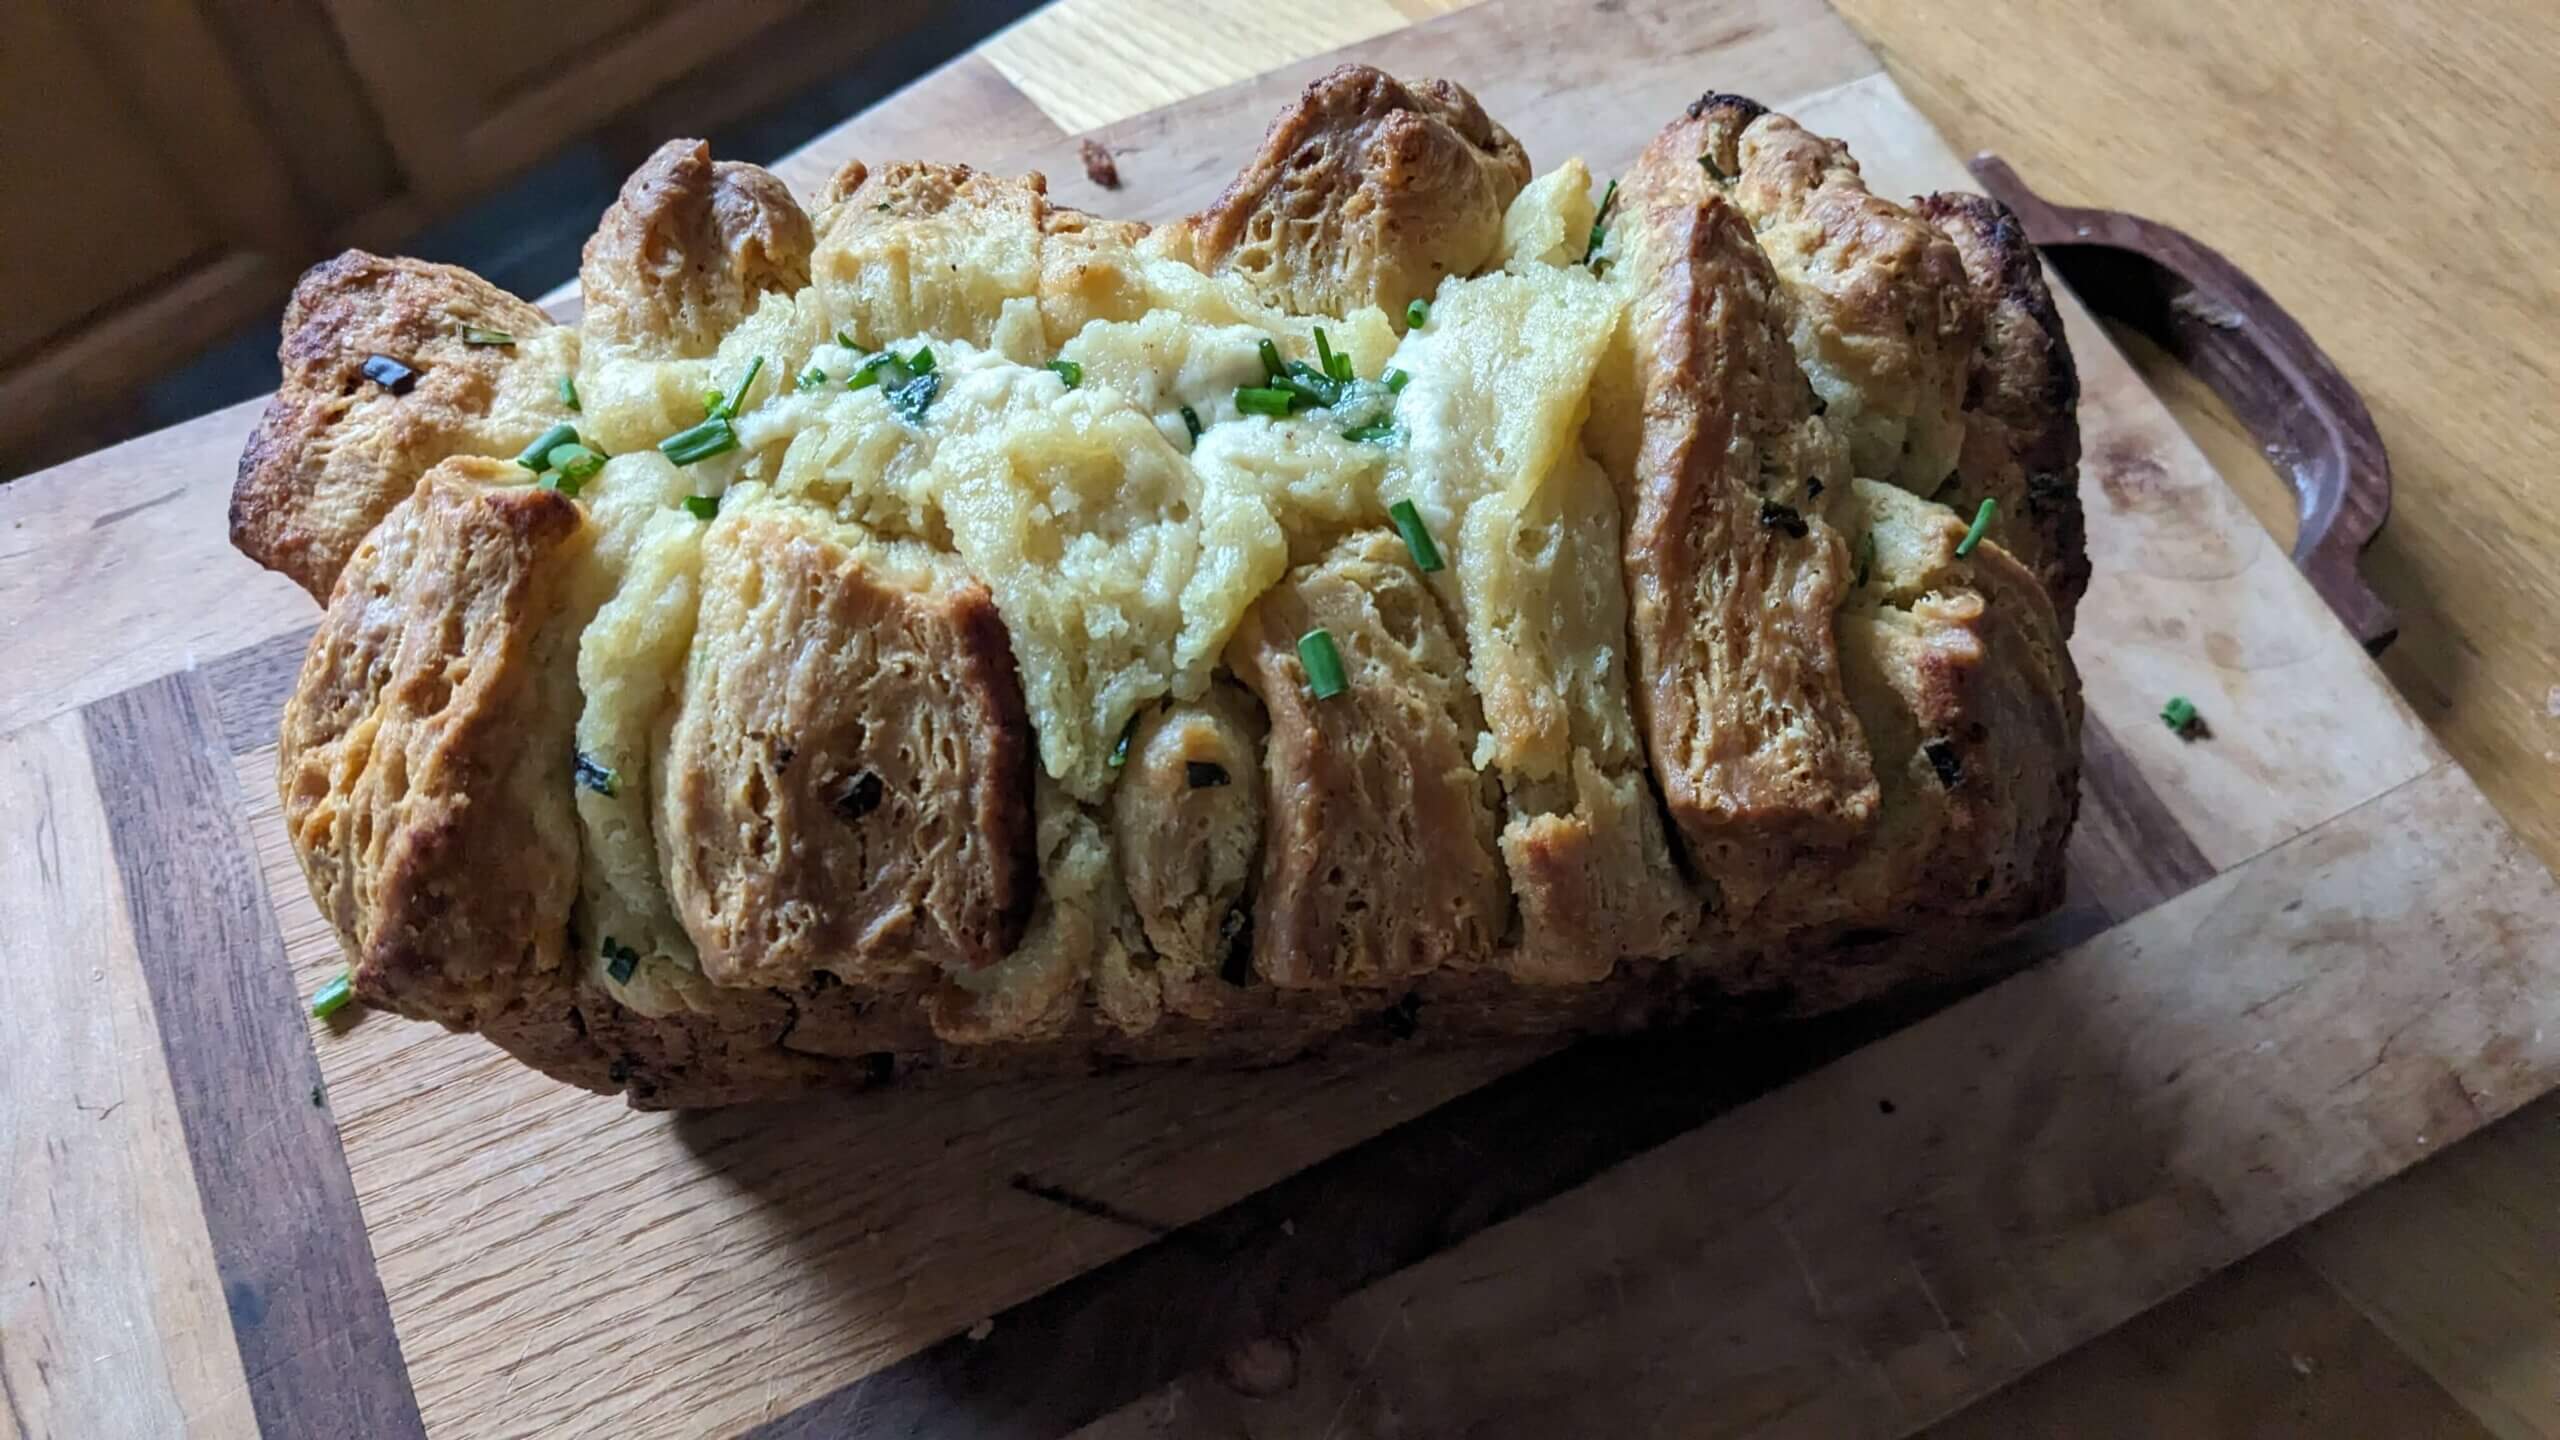 Garlic and Chive Sourdough Biscuit Bread